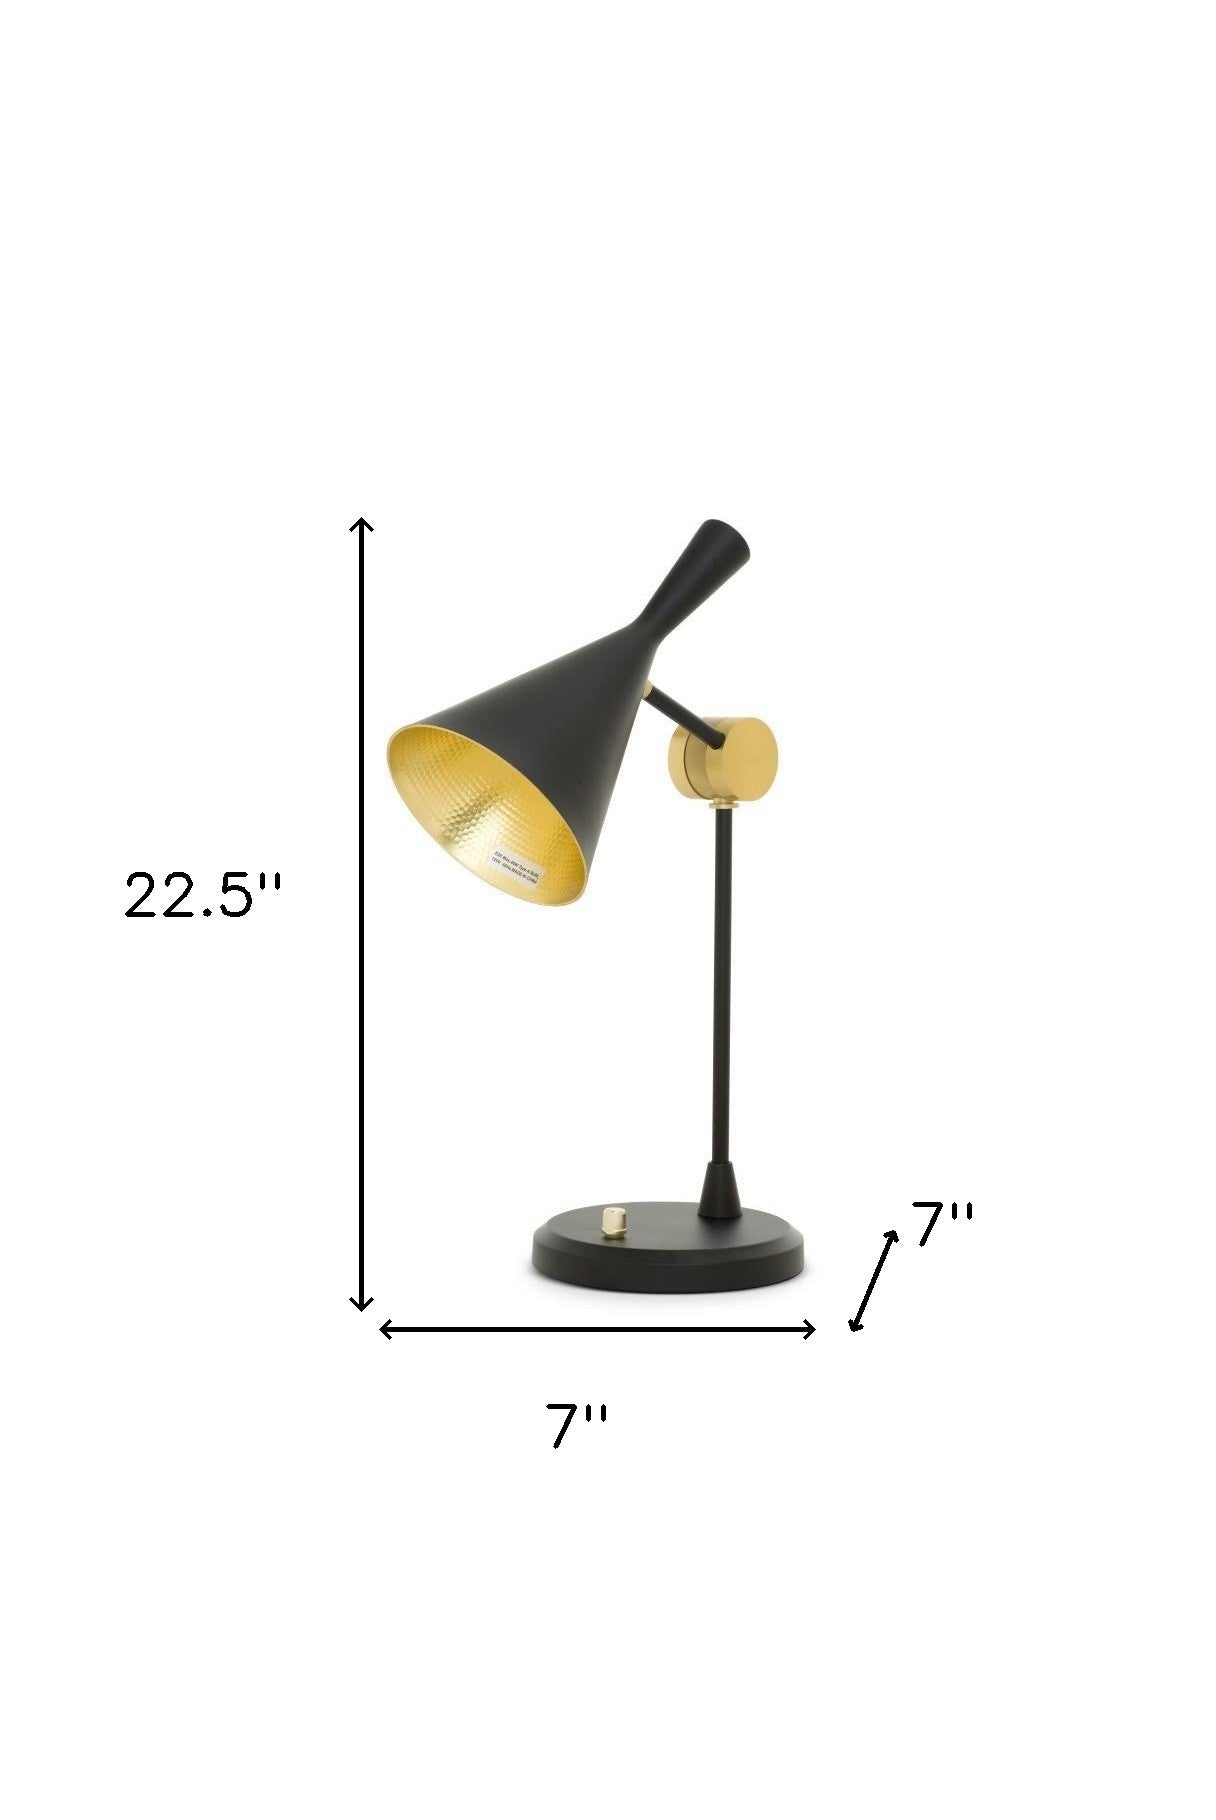 23" Black Metal Desk Table Lamp With Black and Gold Cone Shade